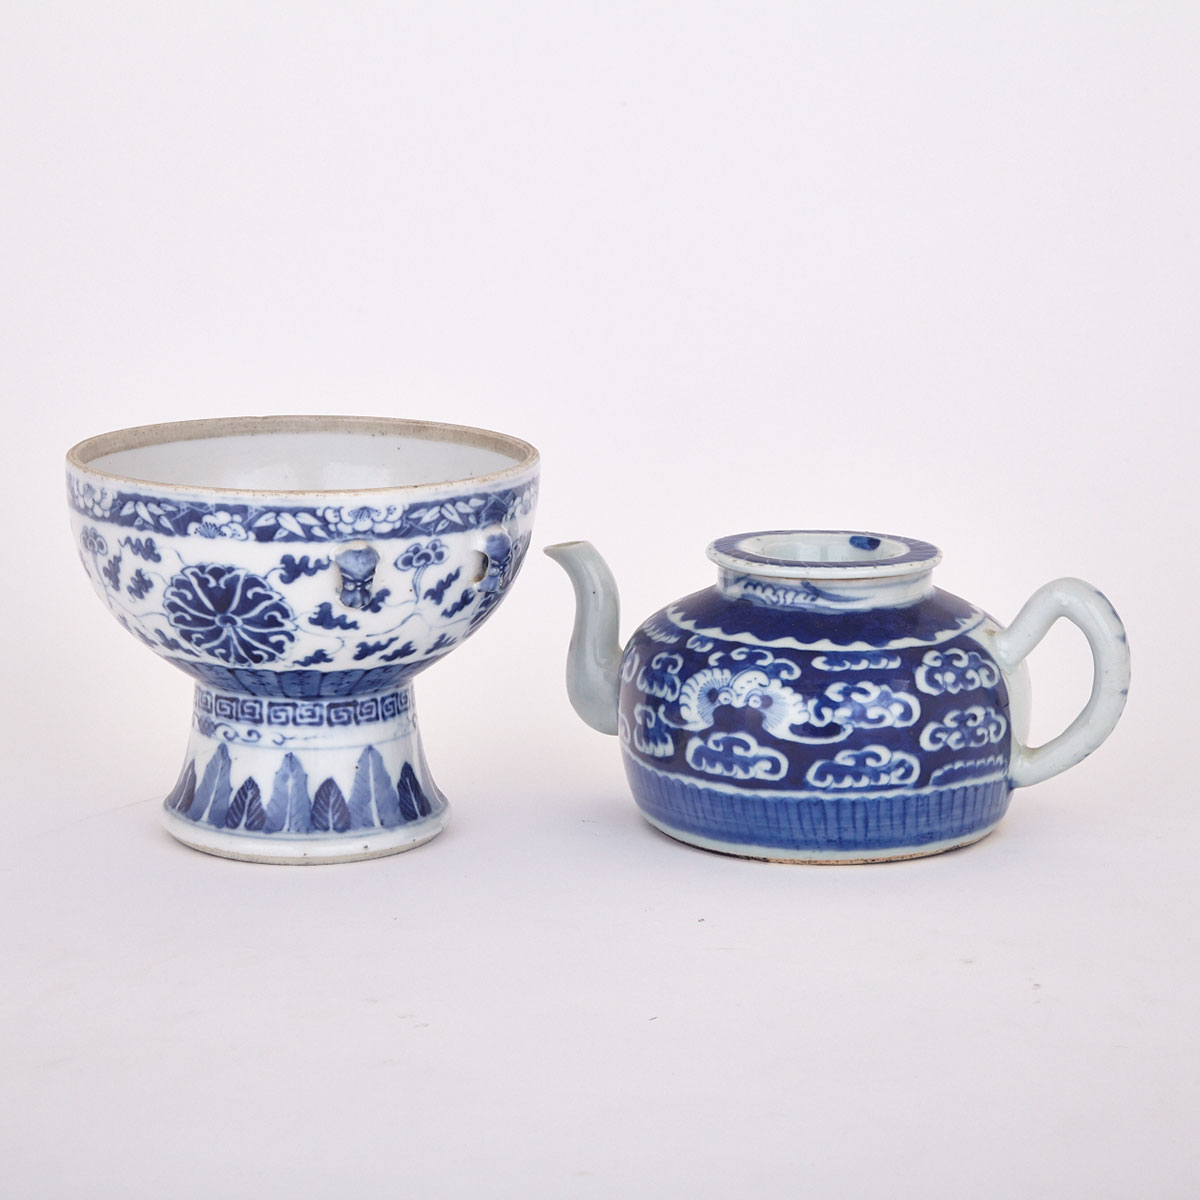 Blue and White Stembowl and Teapot, 19th Century or earlier